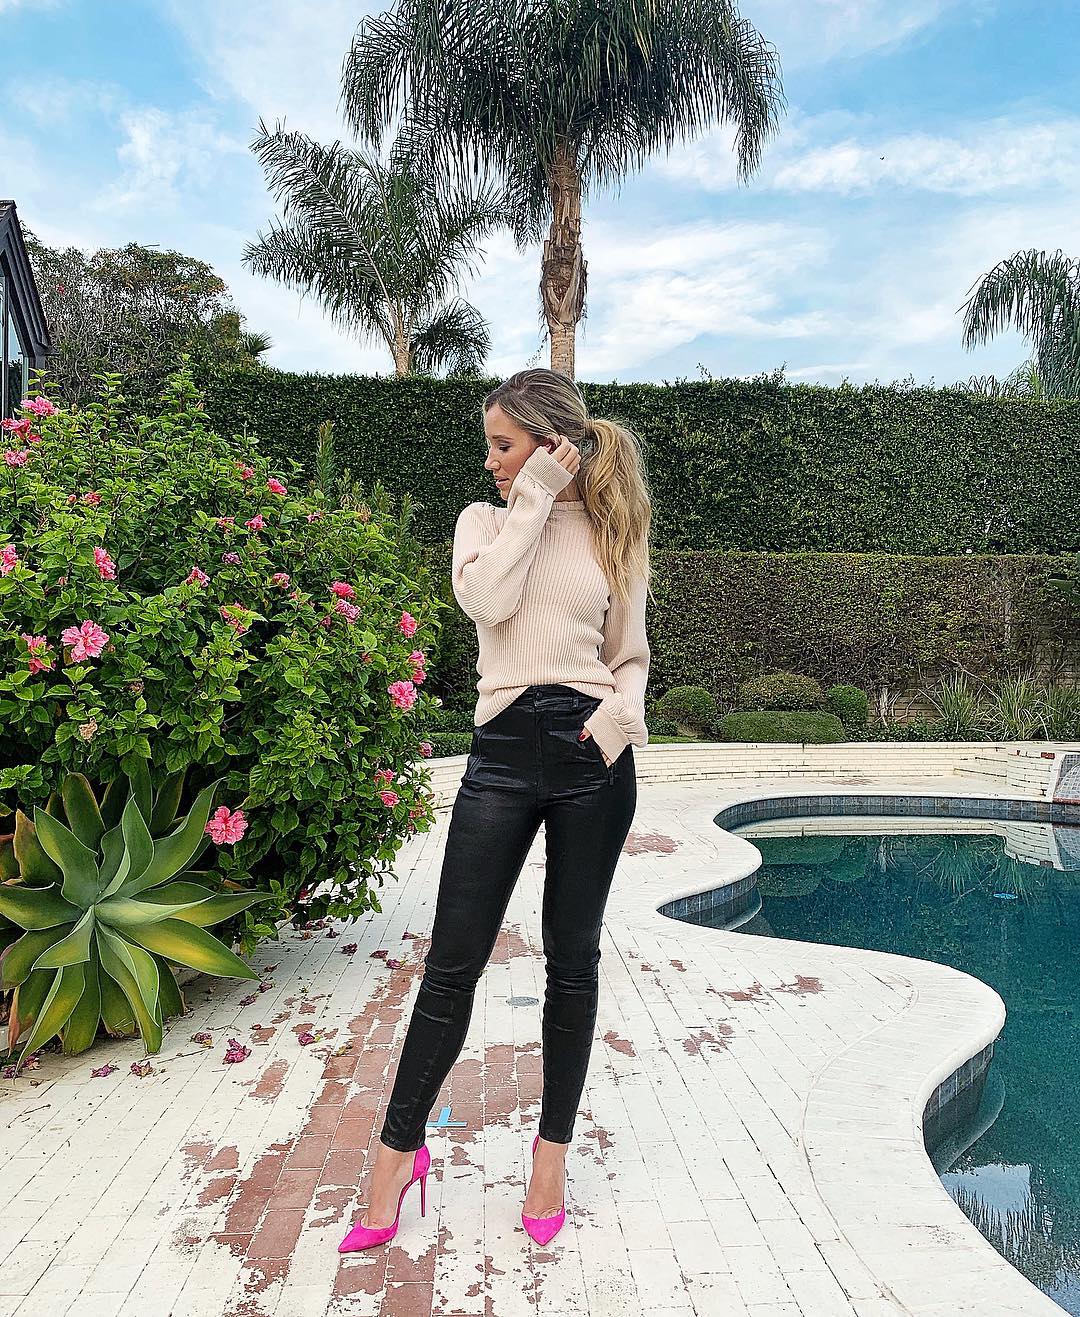 Kevin Durant is a Fan of Kristine Leahy’s Skintight Jeans.